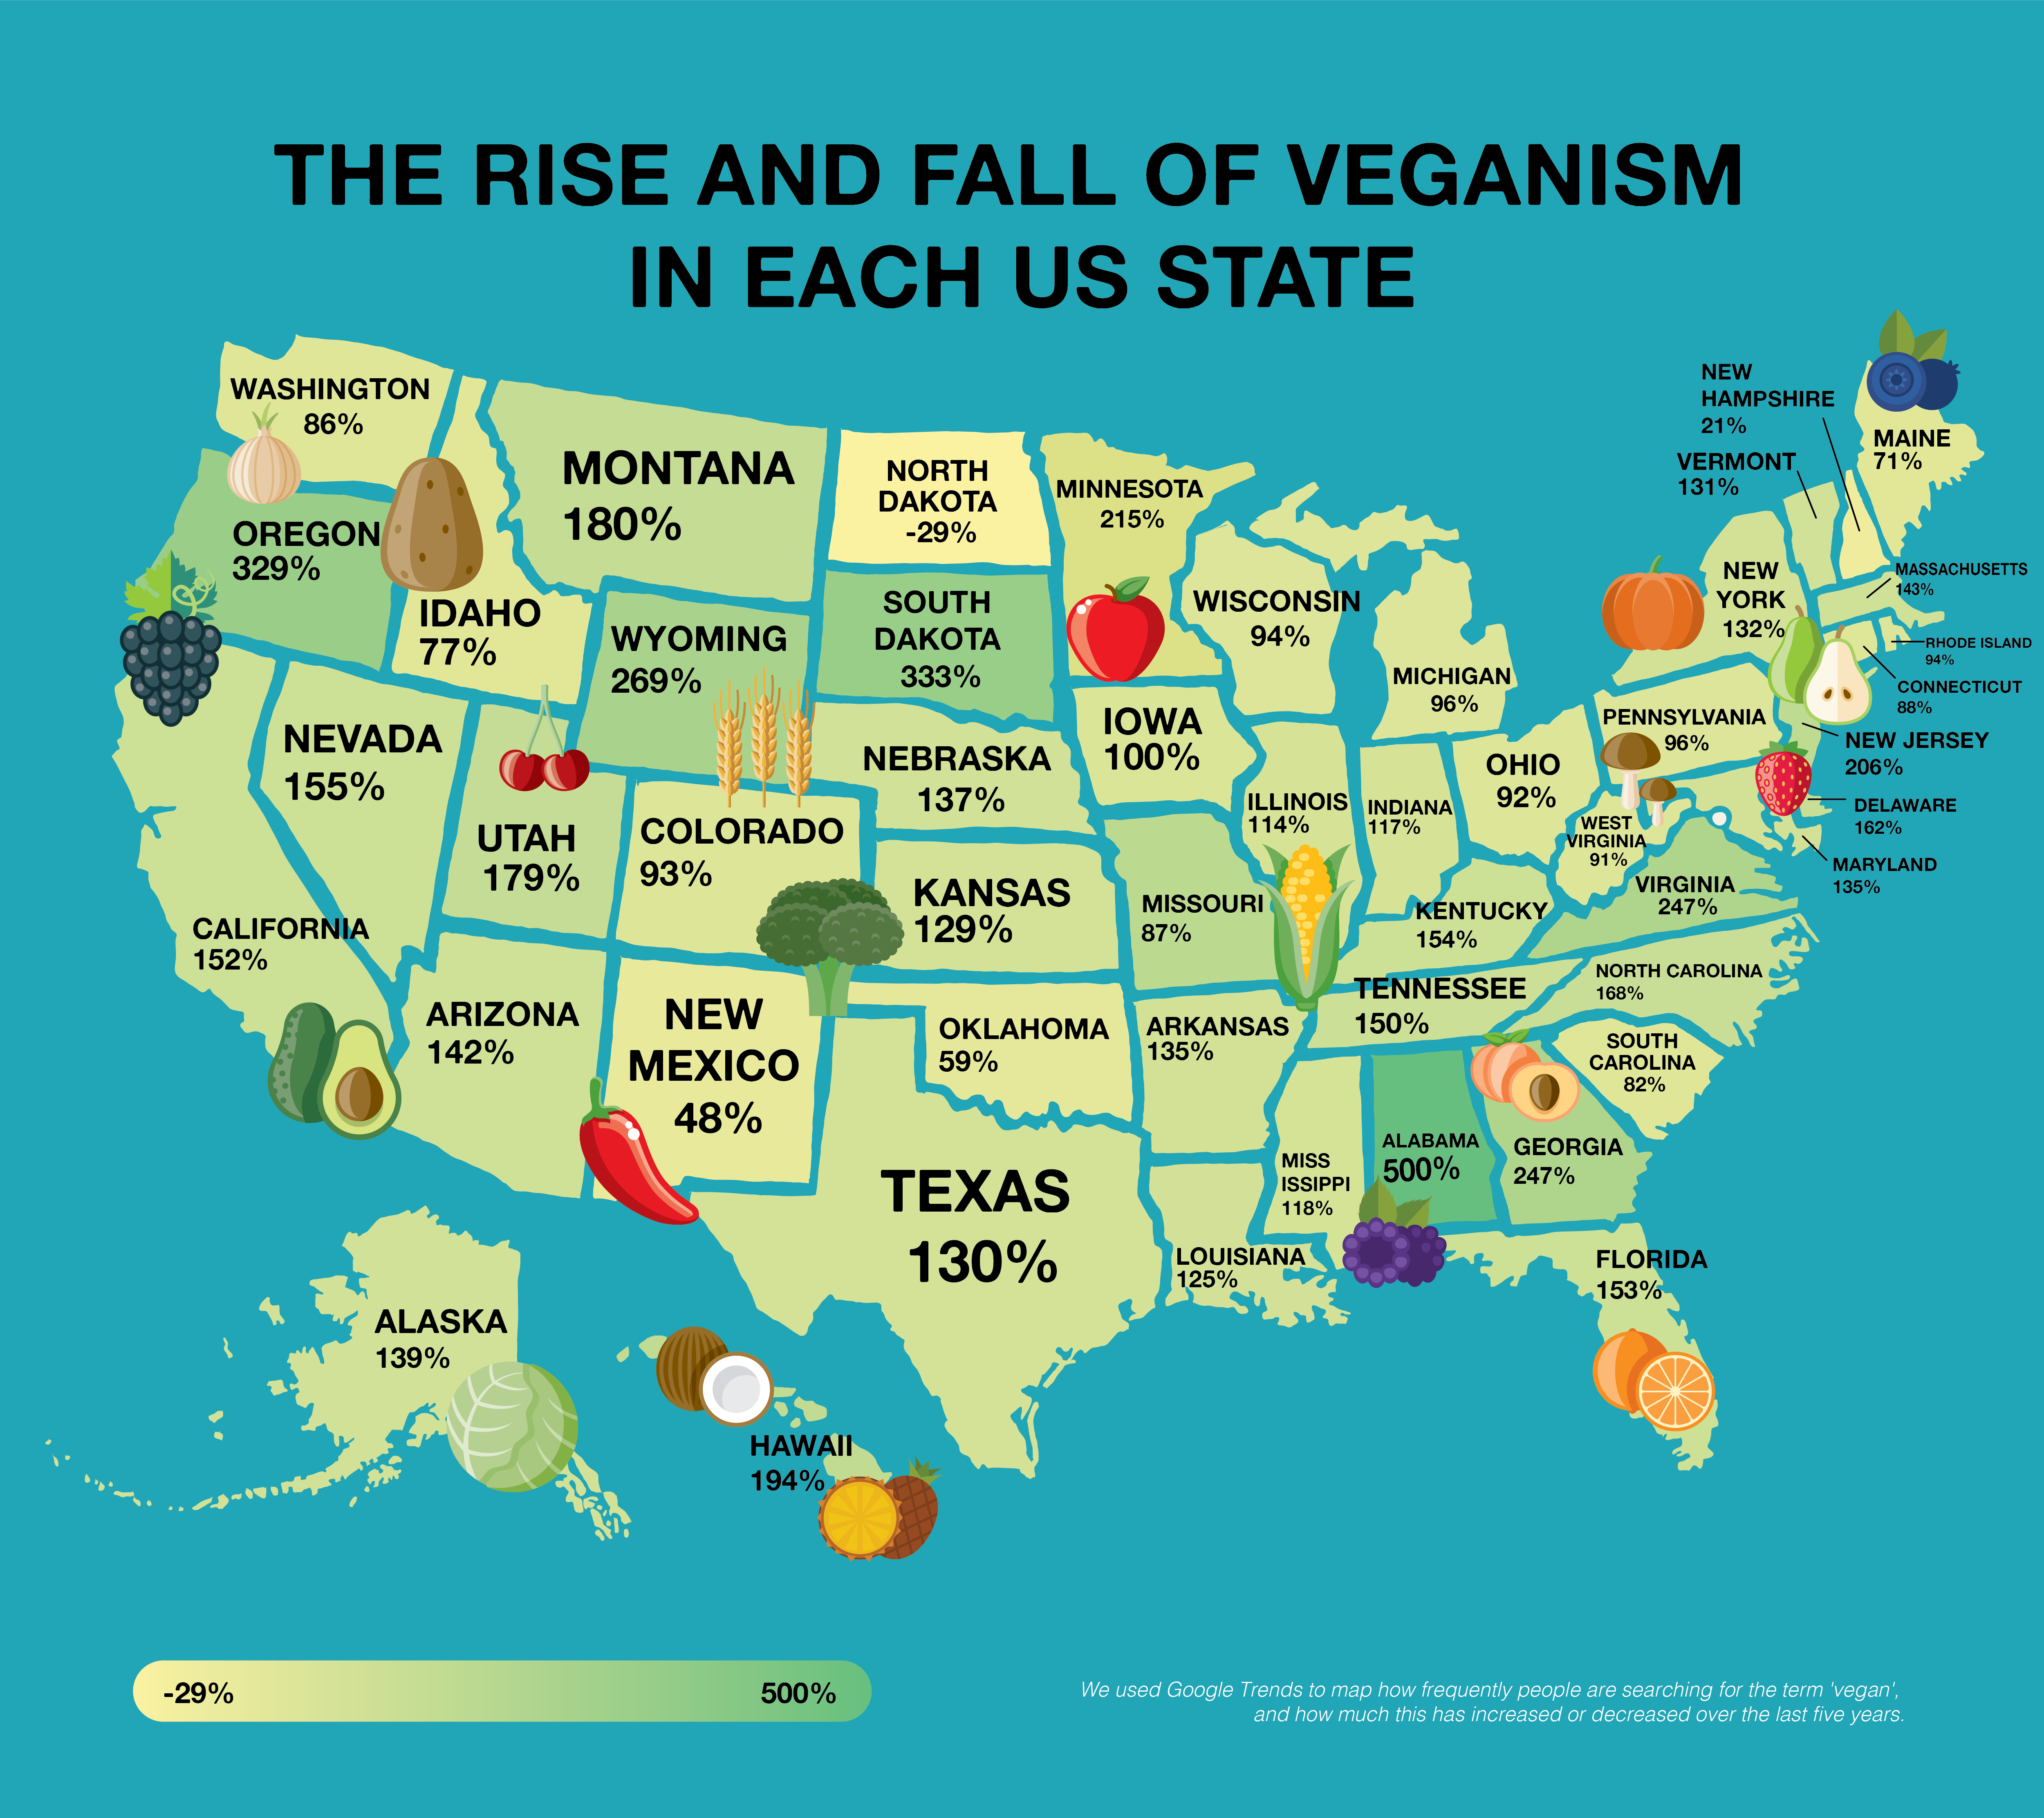 The rise and fall of veganism in each state